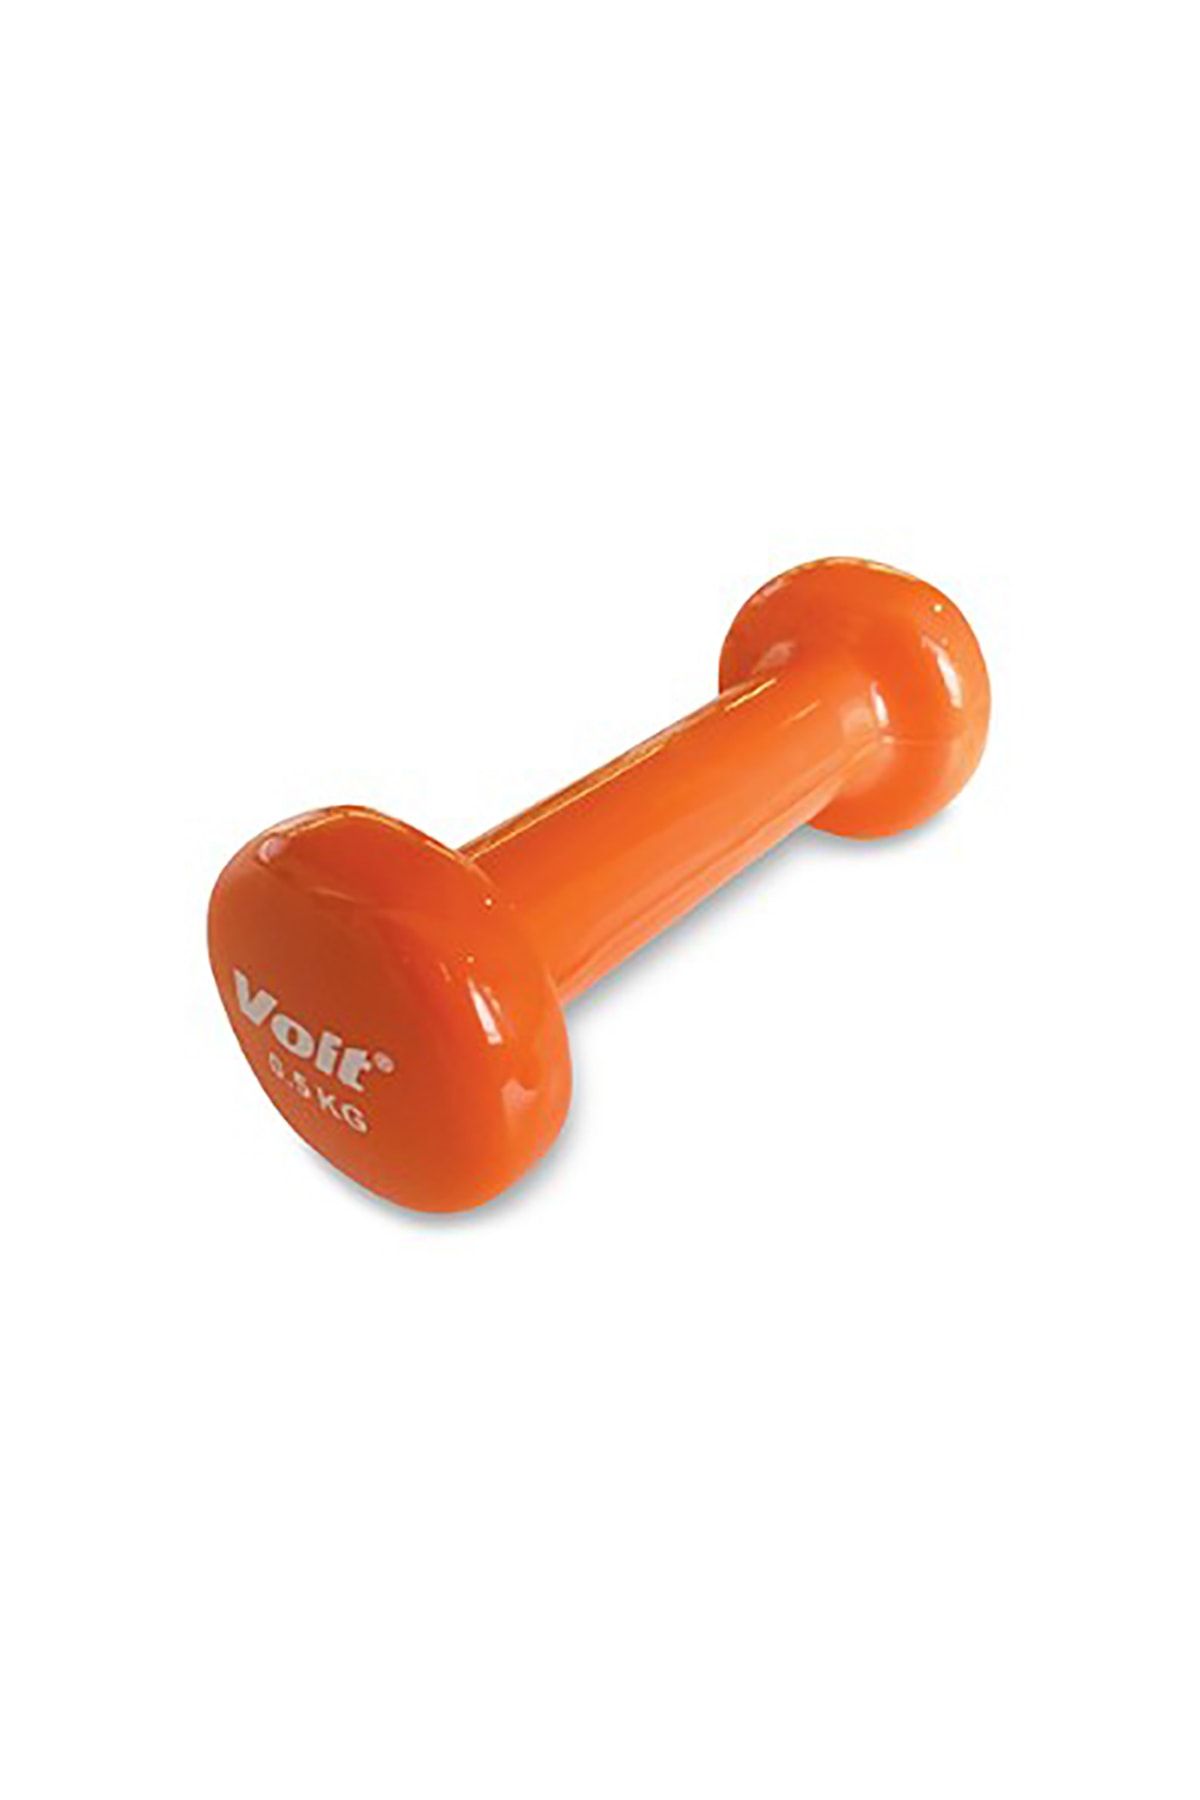 Voit DB107 DIPPING DUMBELL 0,5KG TURNC